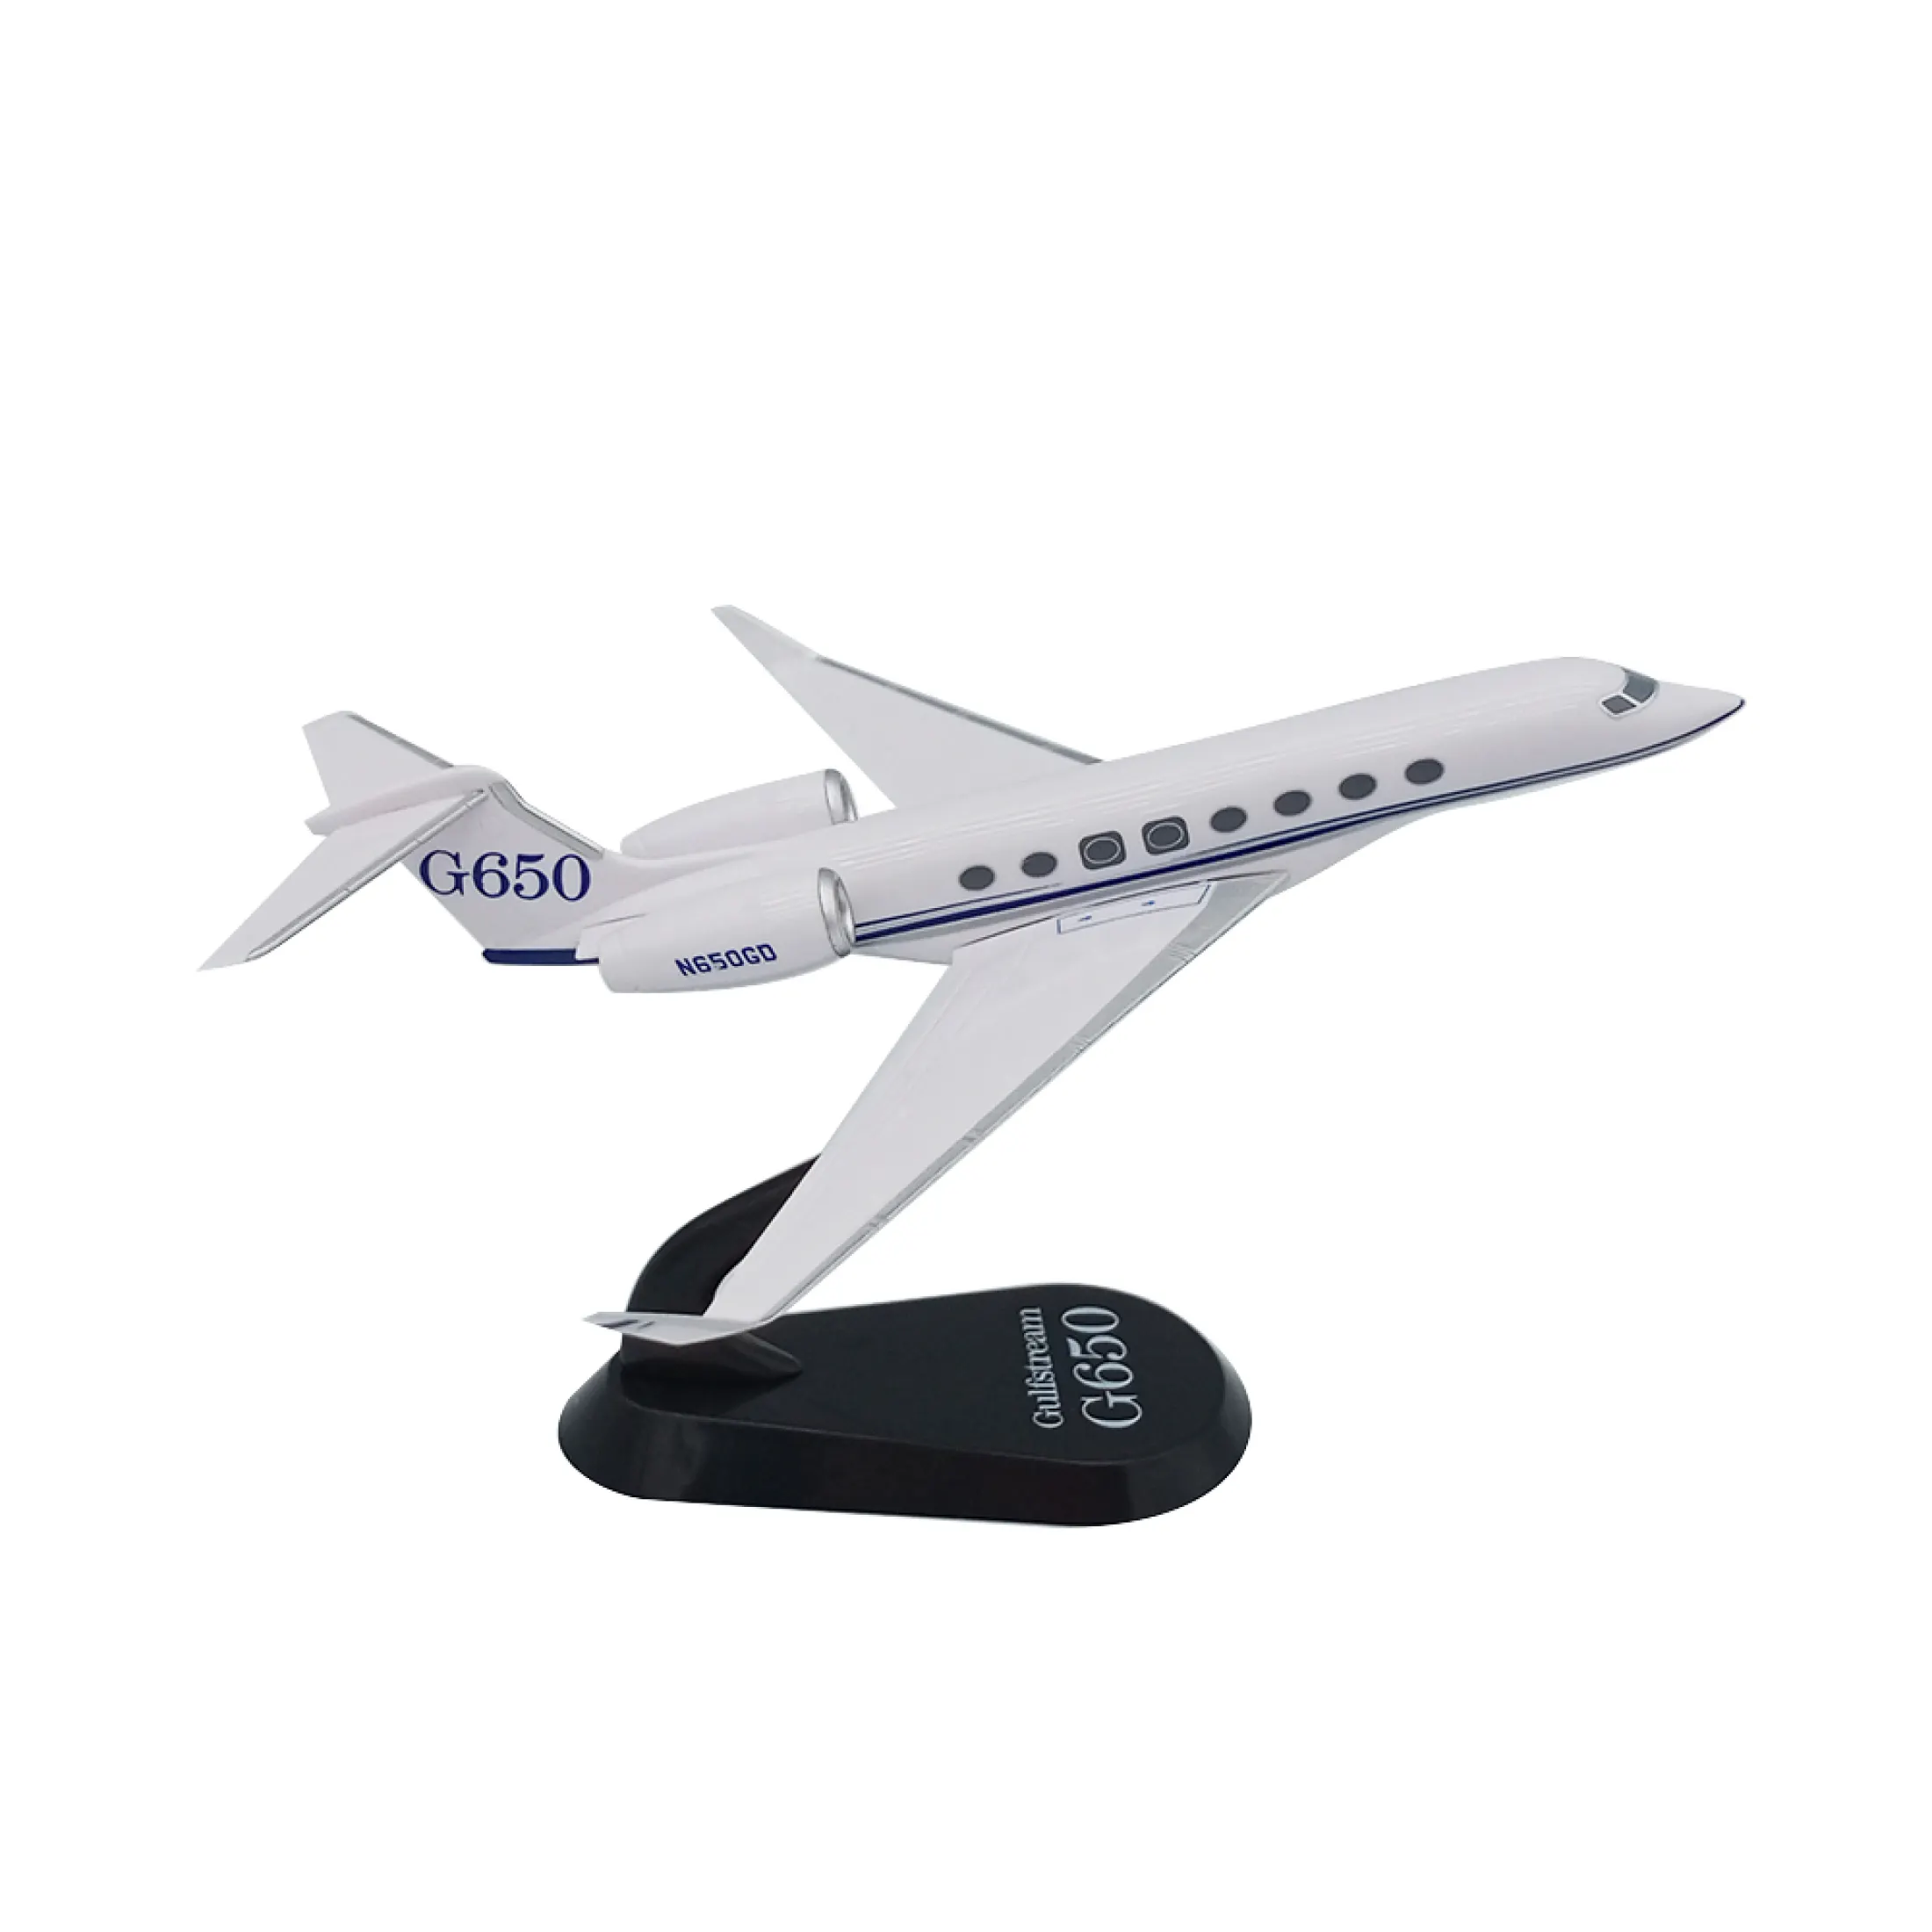 New 1:200 Scale Gulfstream G650 Business Airliner Aircraft Diecast Metal Model